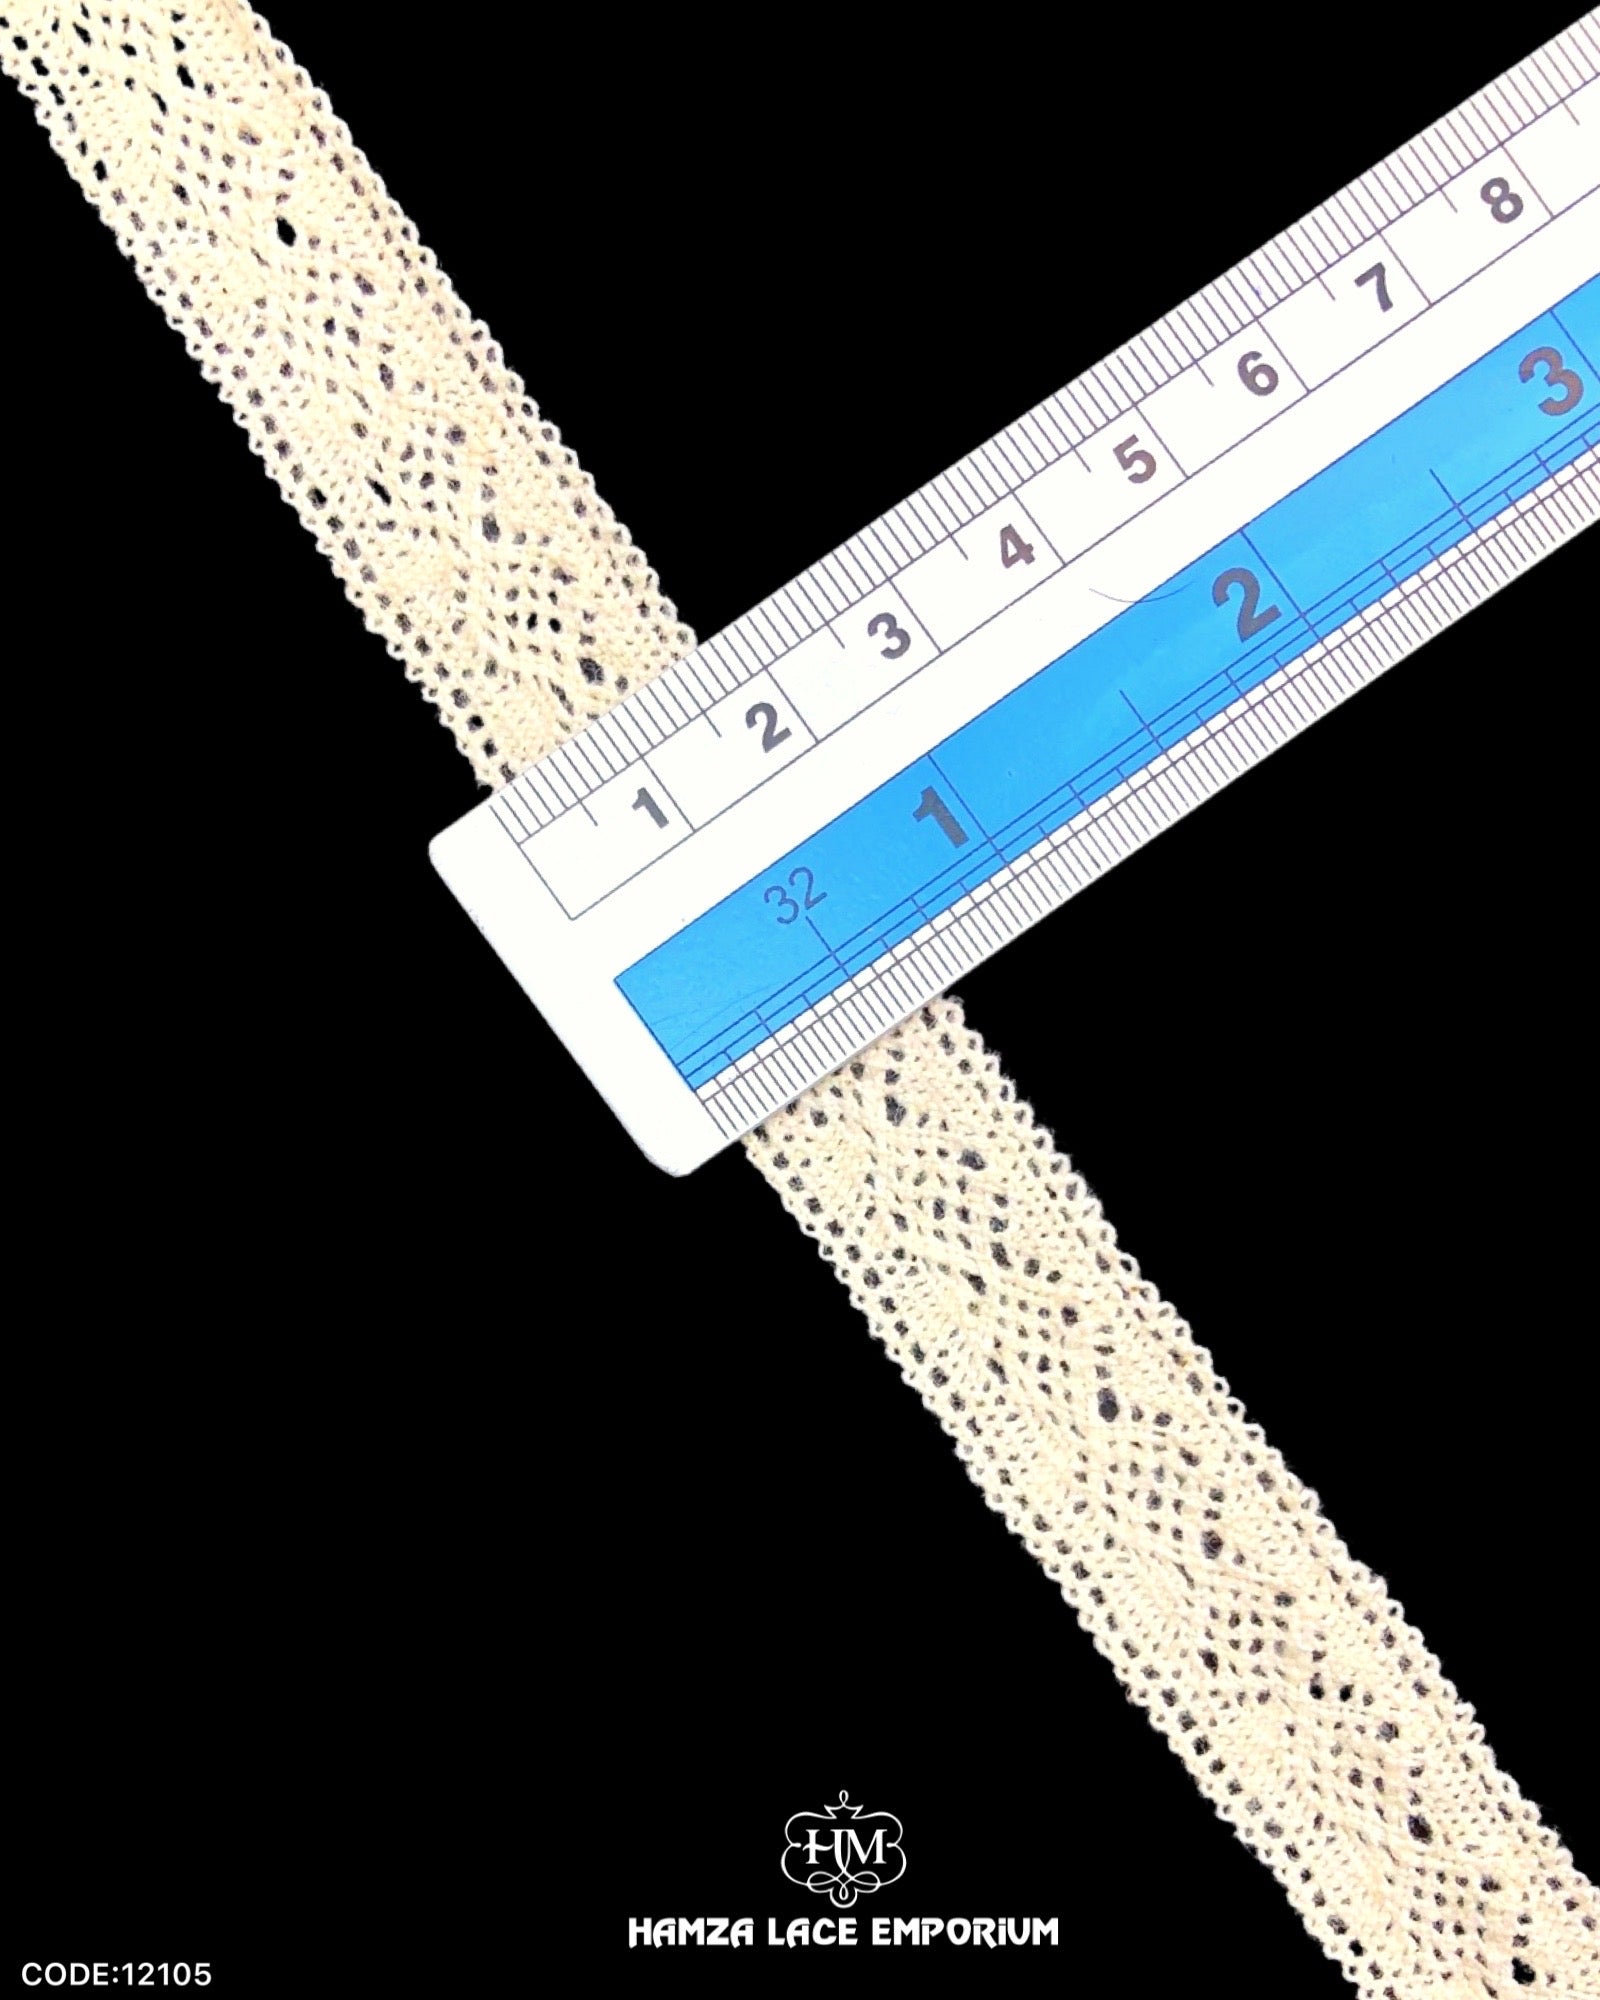 'Center Filling Lace 12105' displayed with a ruler to indicate its width as '0.5' inches.